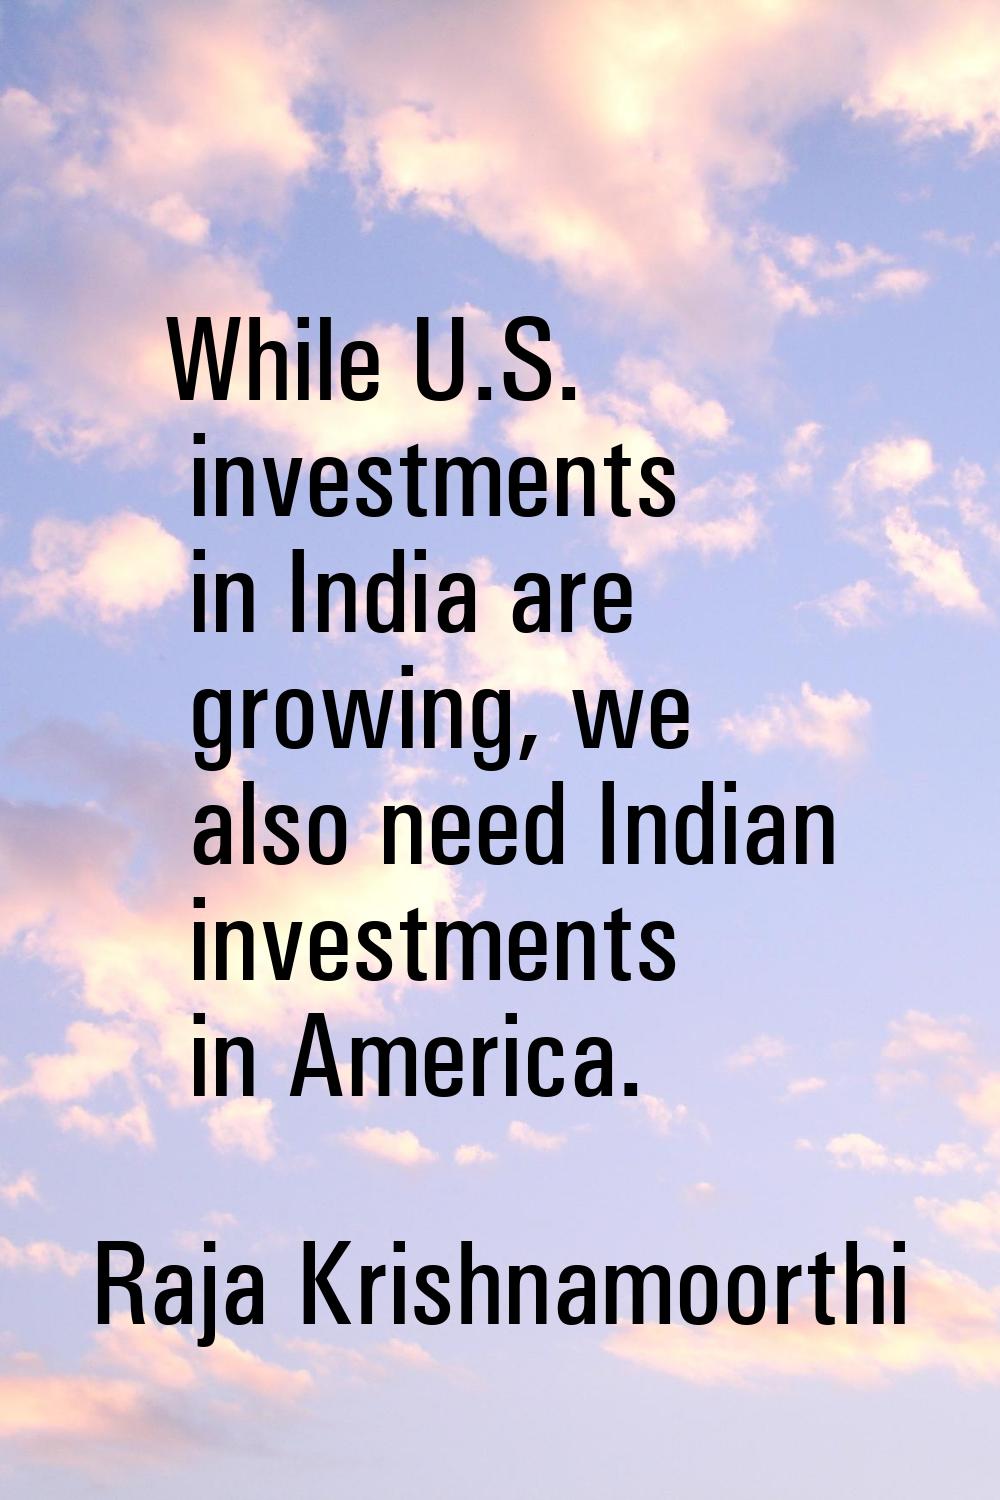 While U.S. investments in India are growing, we also need Indian investments in America.